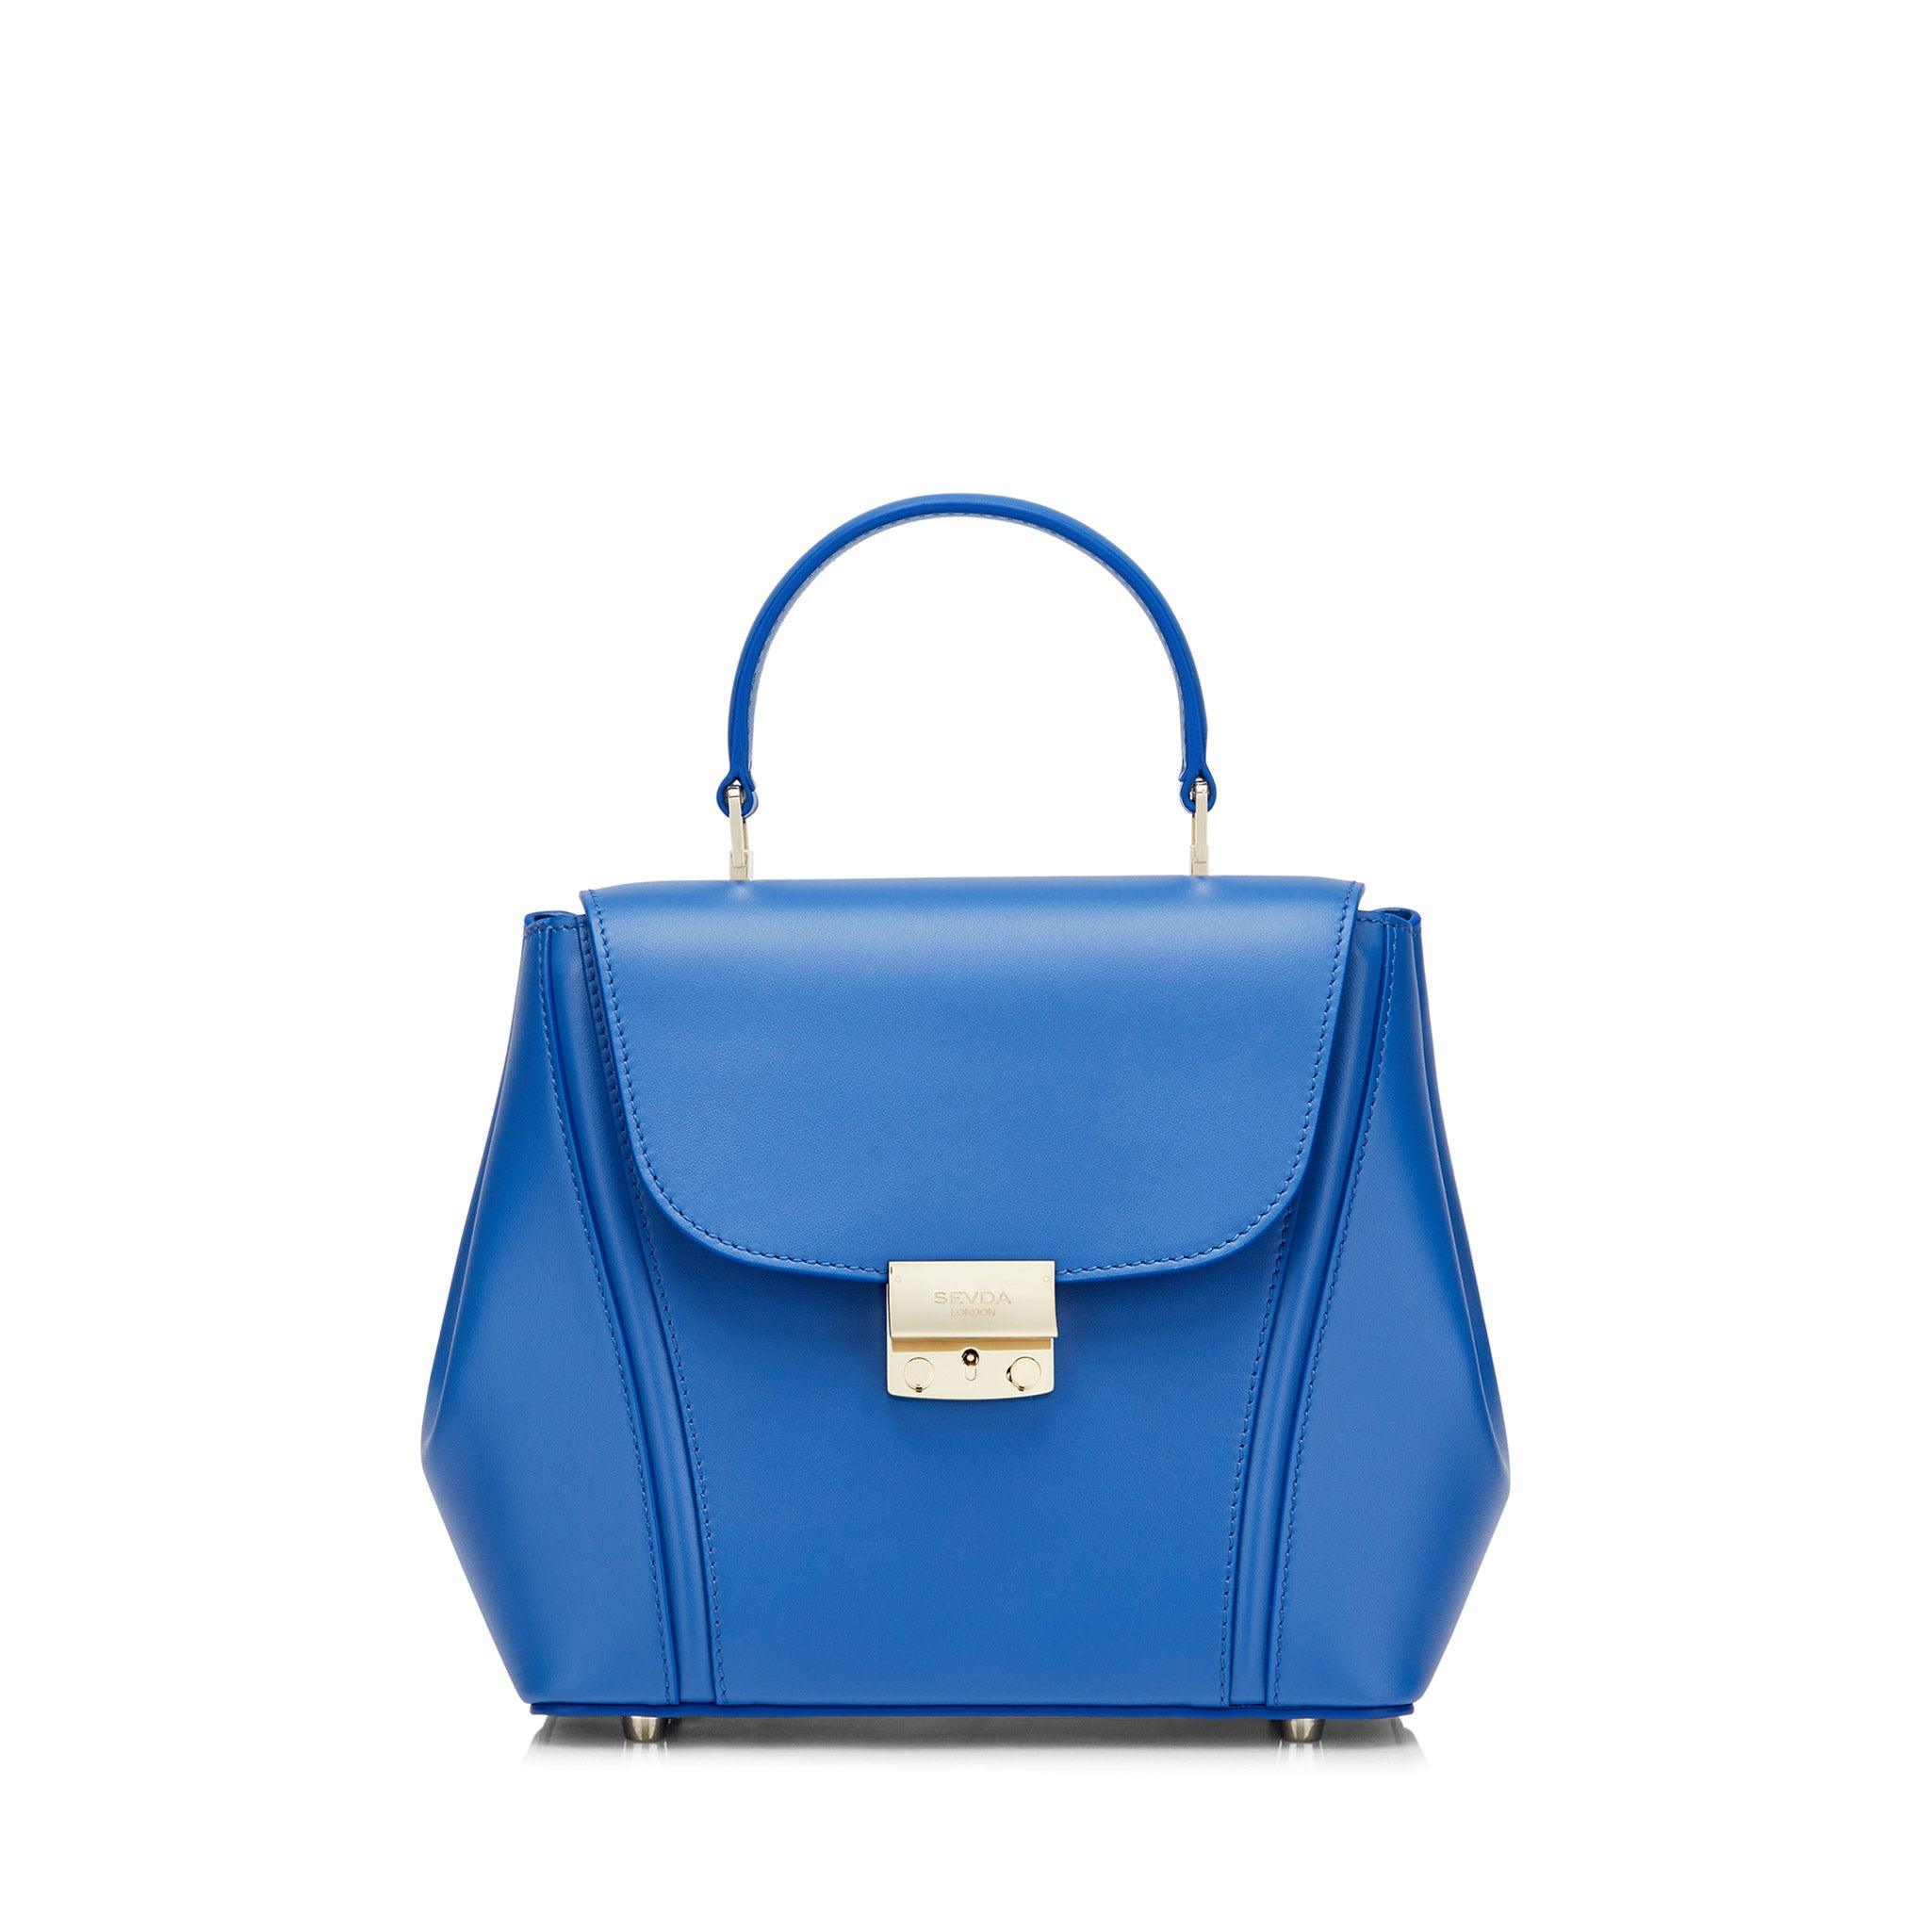 Royal Blue Small Top Handle Designer Bag - The fusion of London's style and Italy's craftsmanship.